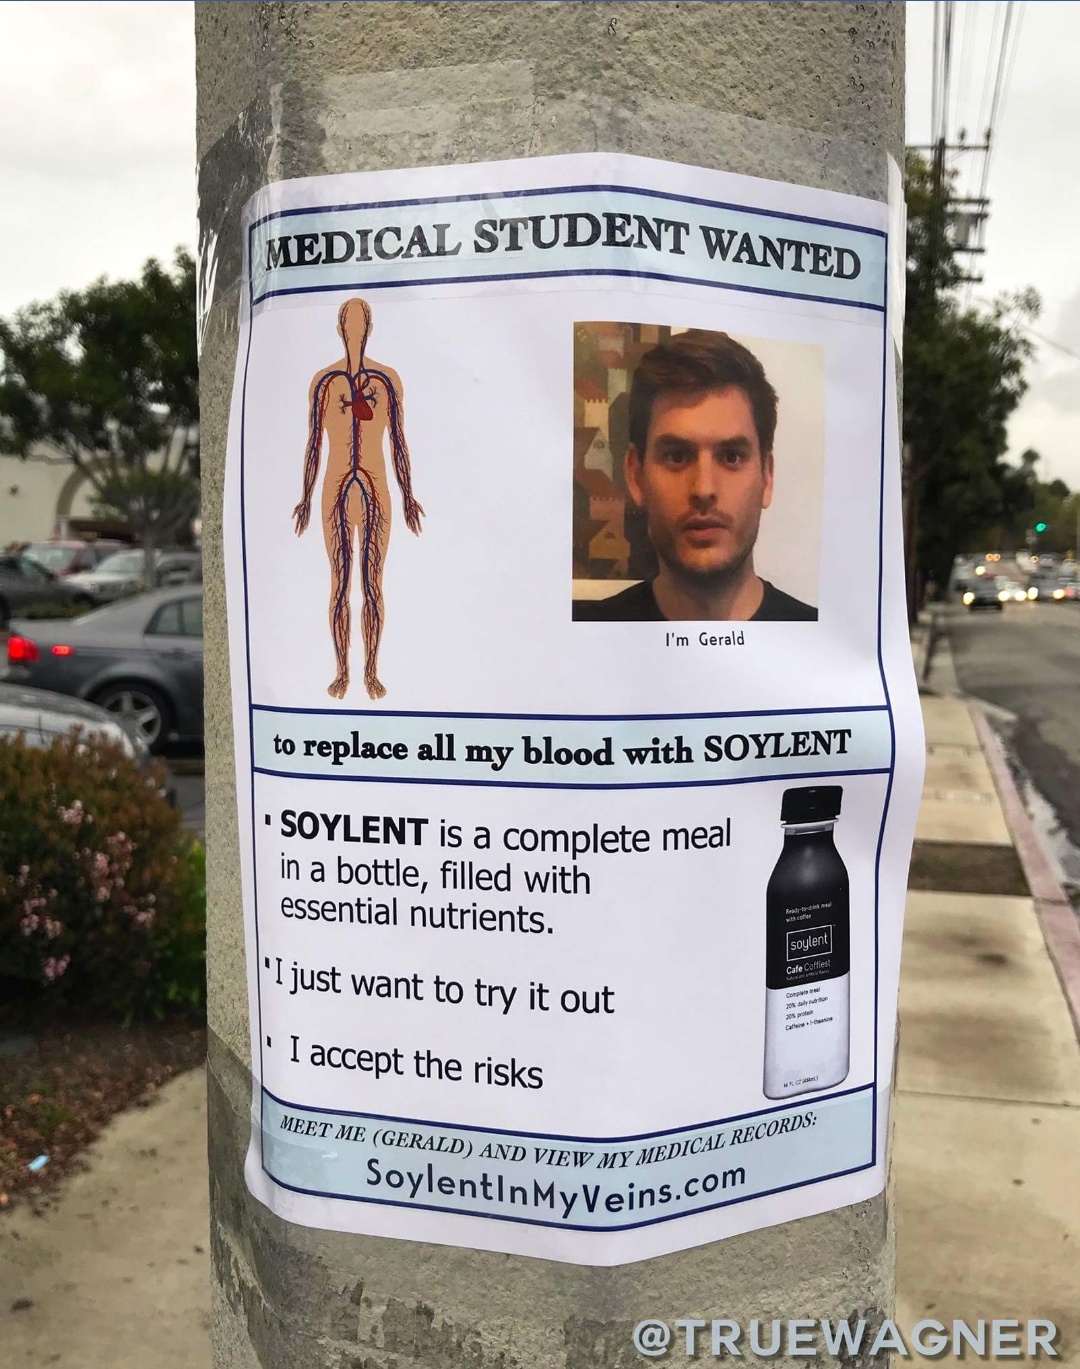 soylent meme - Medical Student Wan I'm ald to replace all my blood with Soylent Soylent is a complete meal in a bottle, filled with essential nutrients. "I just want to try it out I accept the risks Neet Ae Gerald And View SoylentinMyVeins. A Wowe Recorre